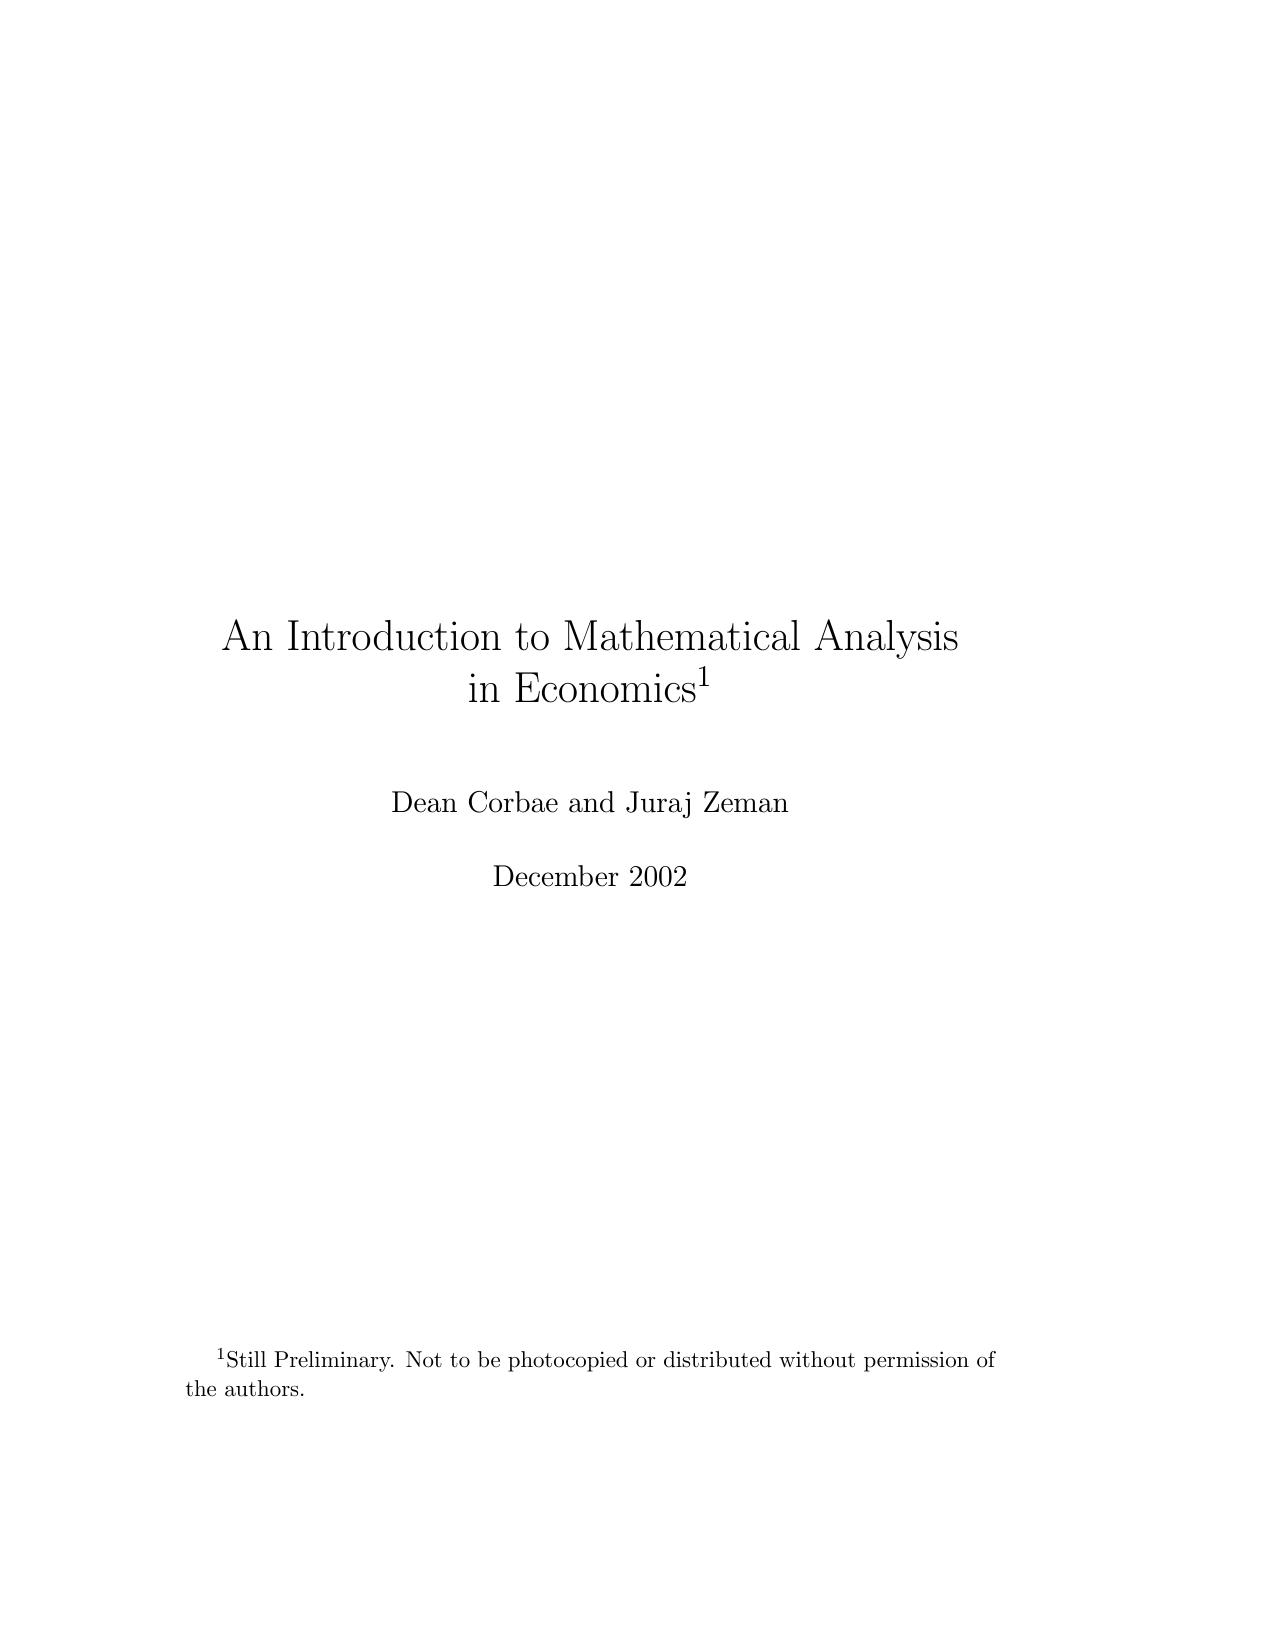 An Introduction to Mathematical Analysis in Economics